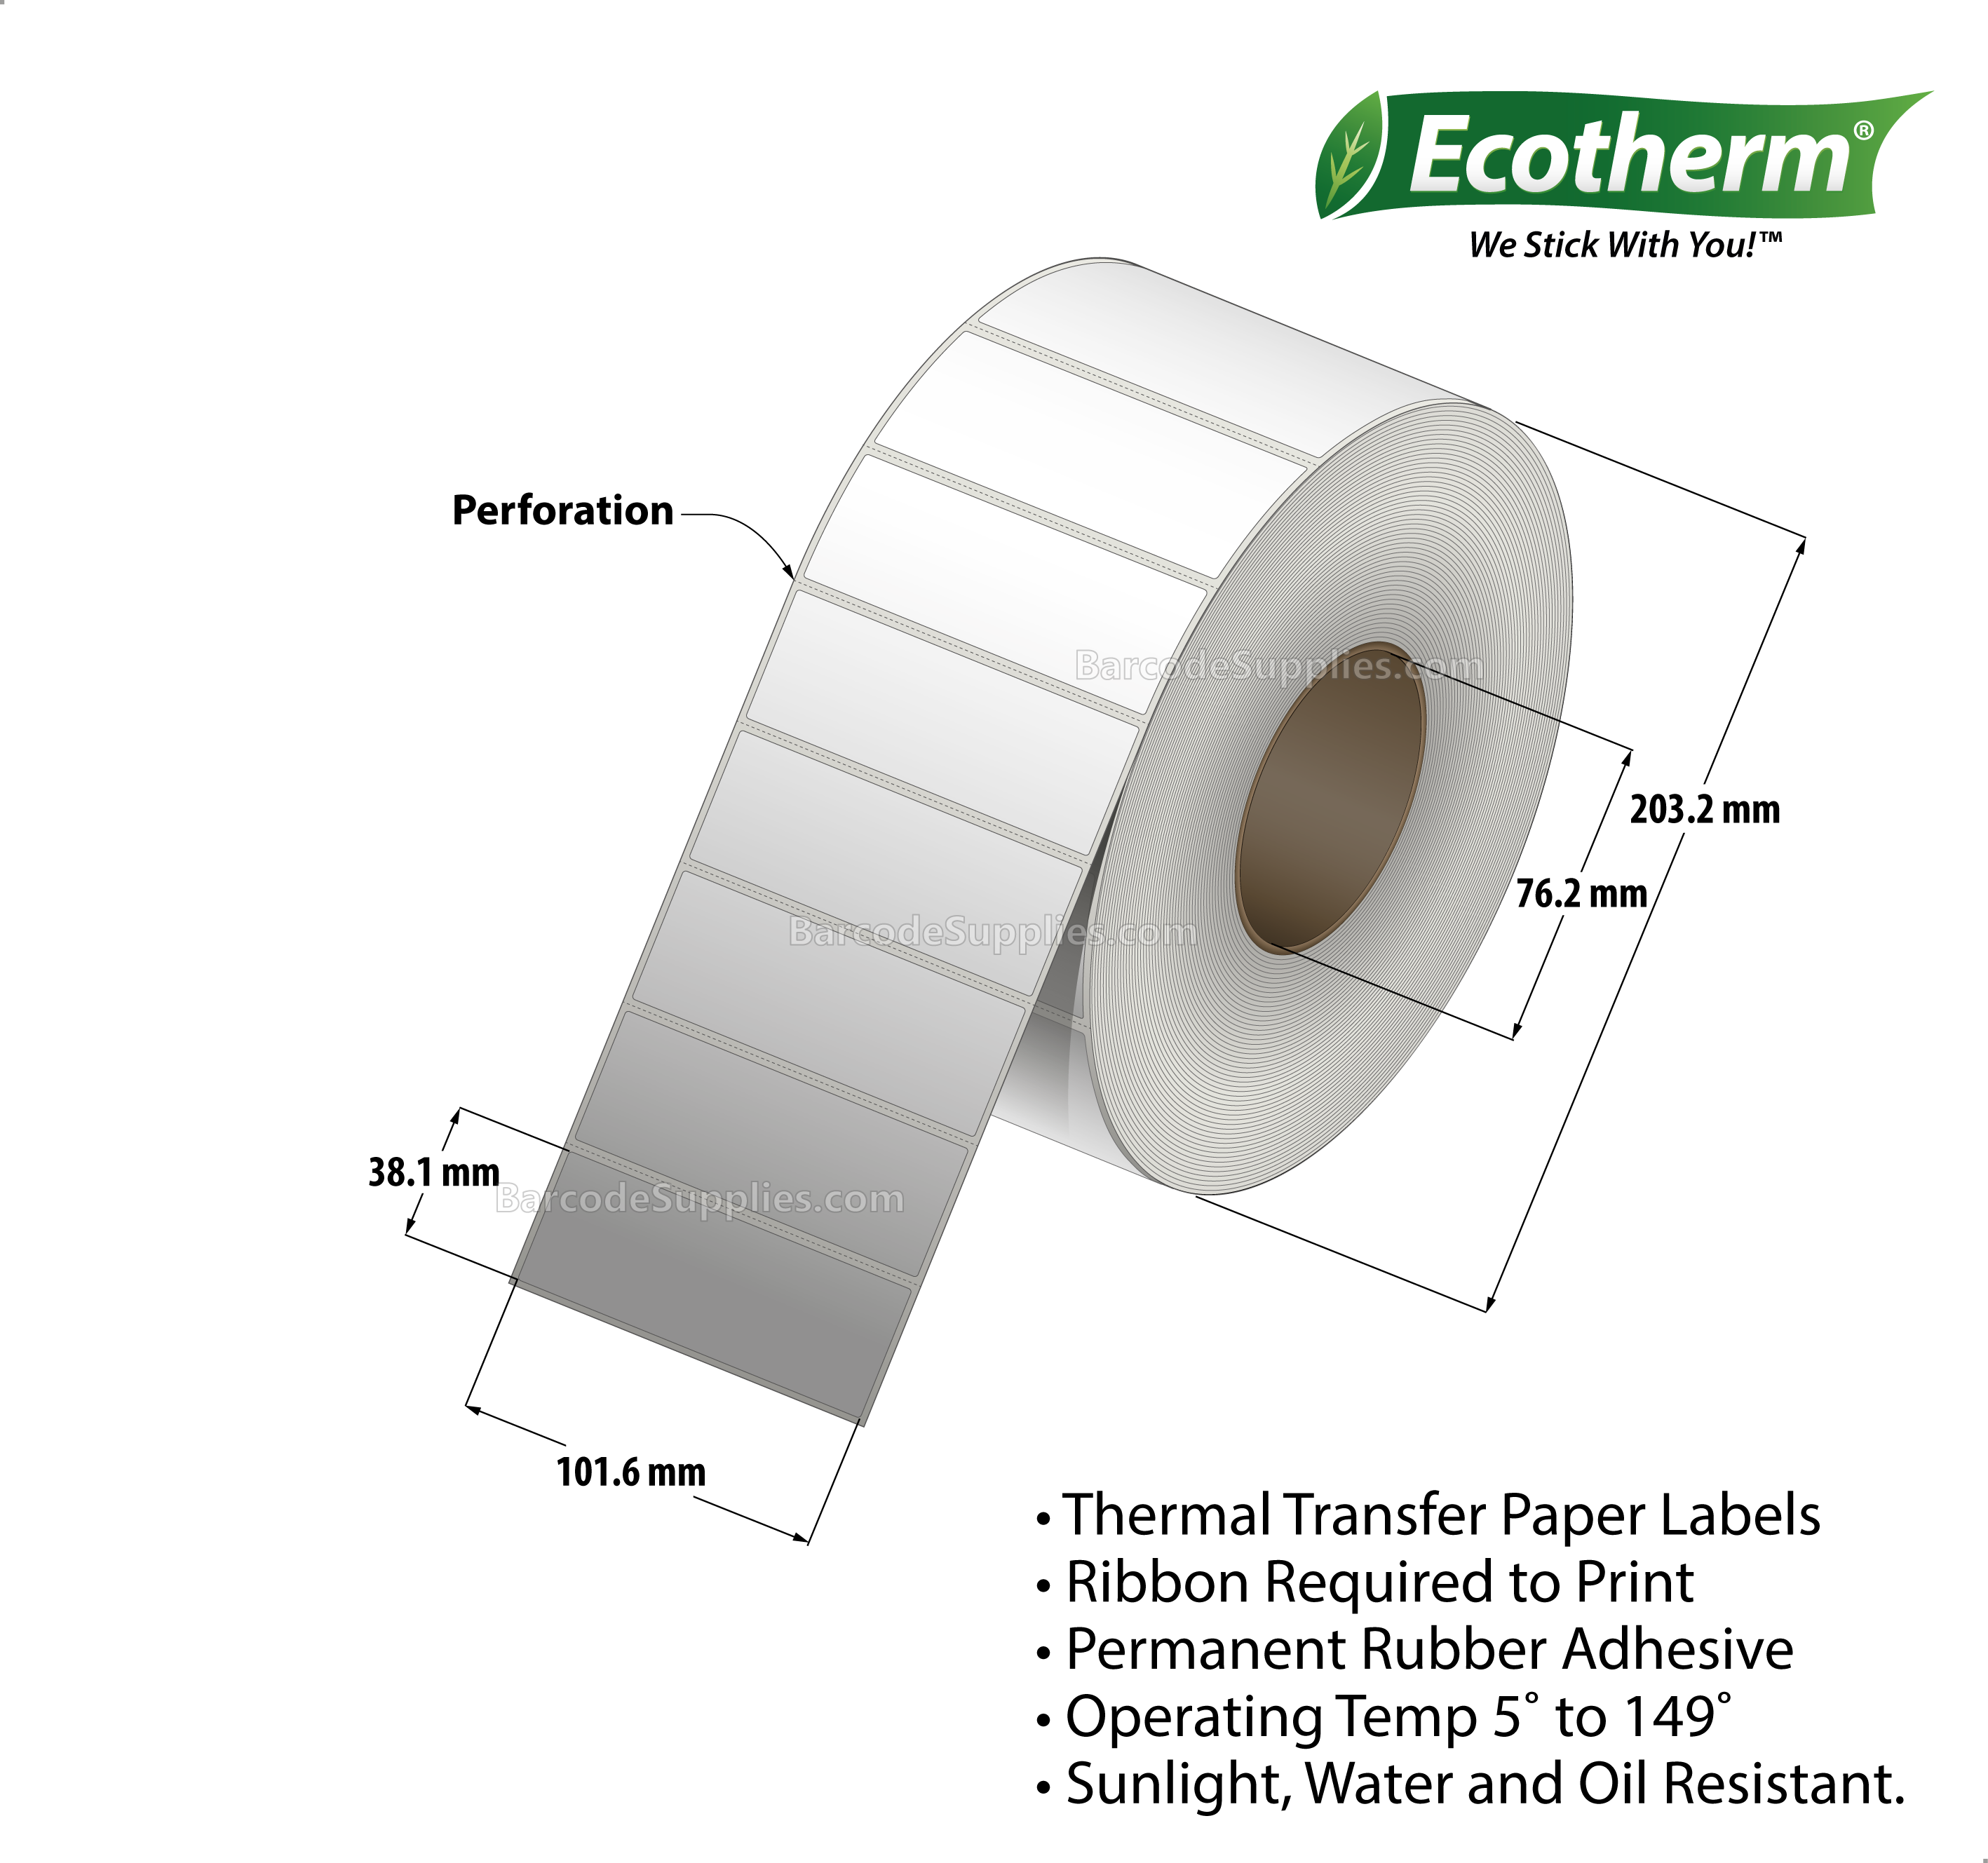 4 x 1.5 Thermal Transfer White Labels With Rubber Adhesive - Perforated - 3850 Labels Per Roll - Carton Of 4 Rolls - 15400 Labels Total - MPN: ECOTHERM28135-4